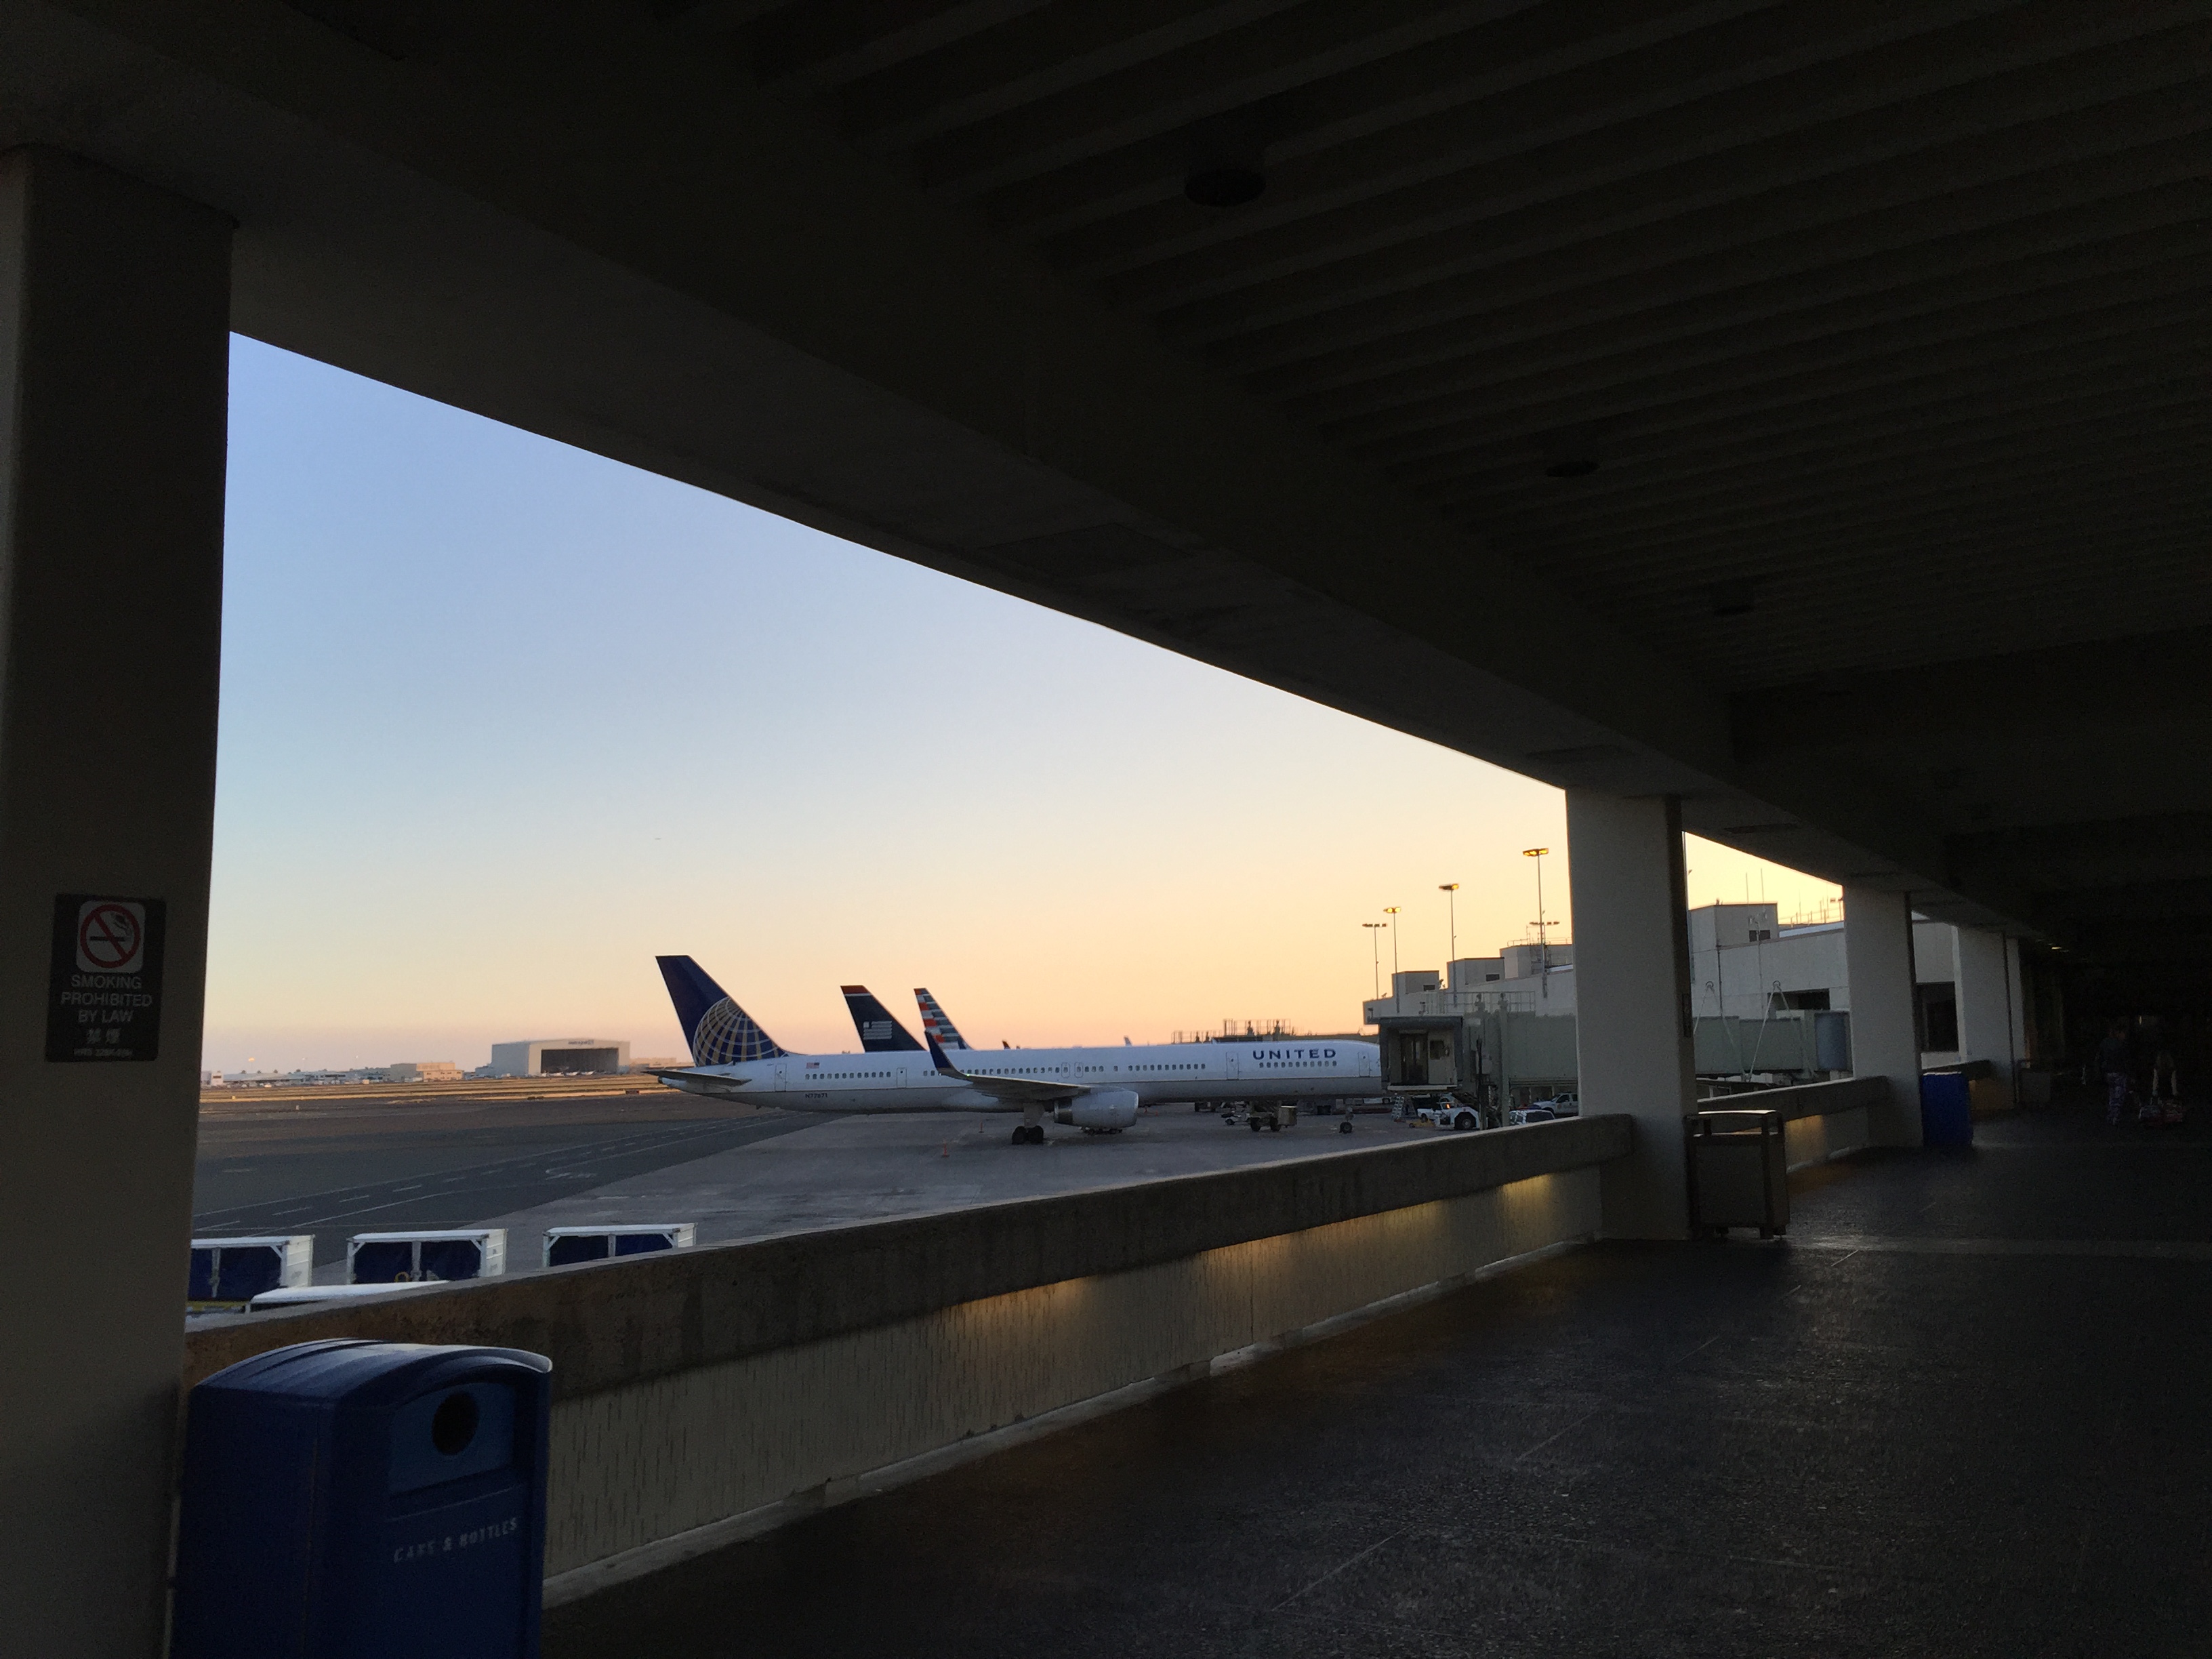 Airplanes parked at airport gates viewed through an opening in an airport walkway.